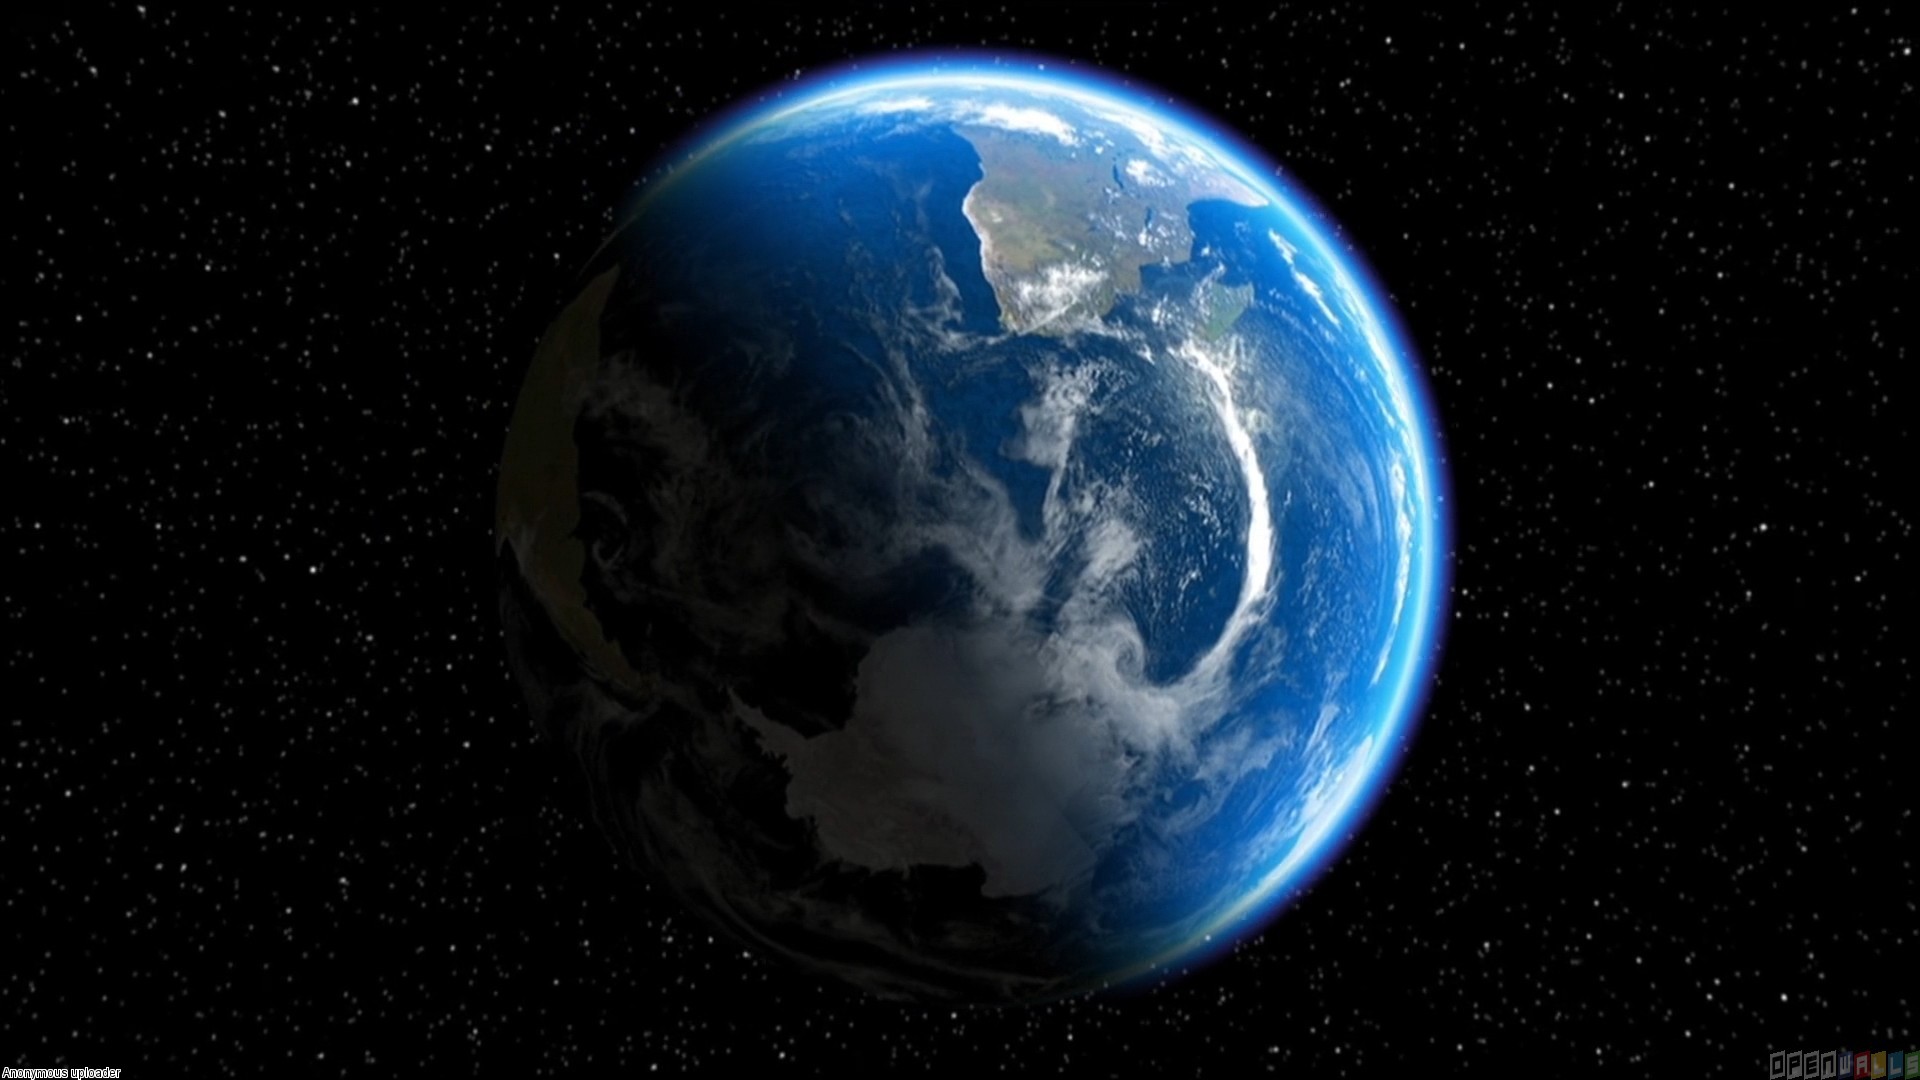 Planet Earth Wallpaper 1687 Hd Wallpapers in Space   Imagescicom